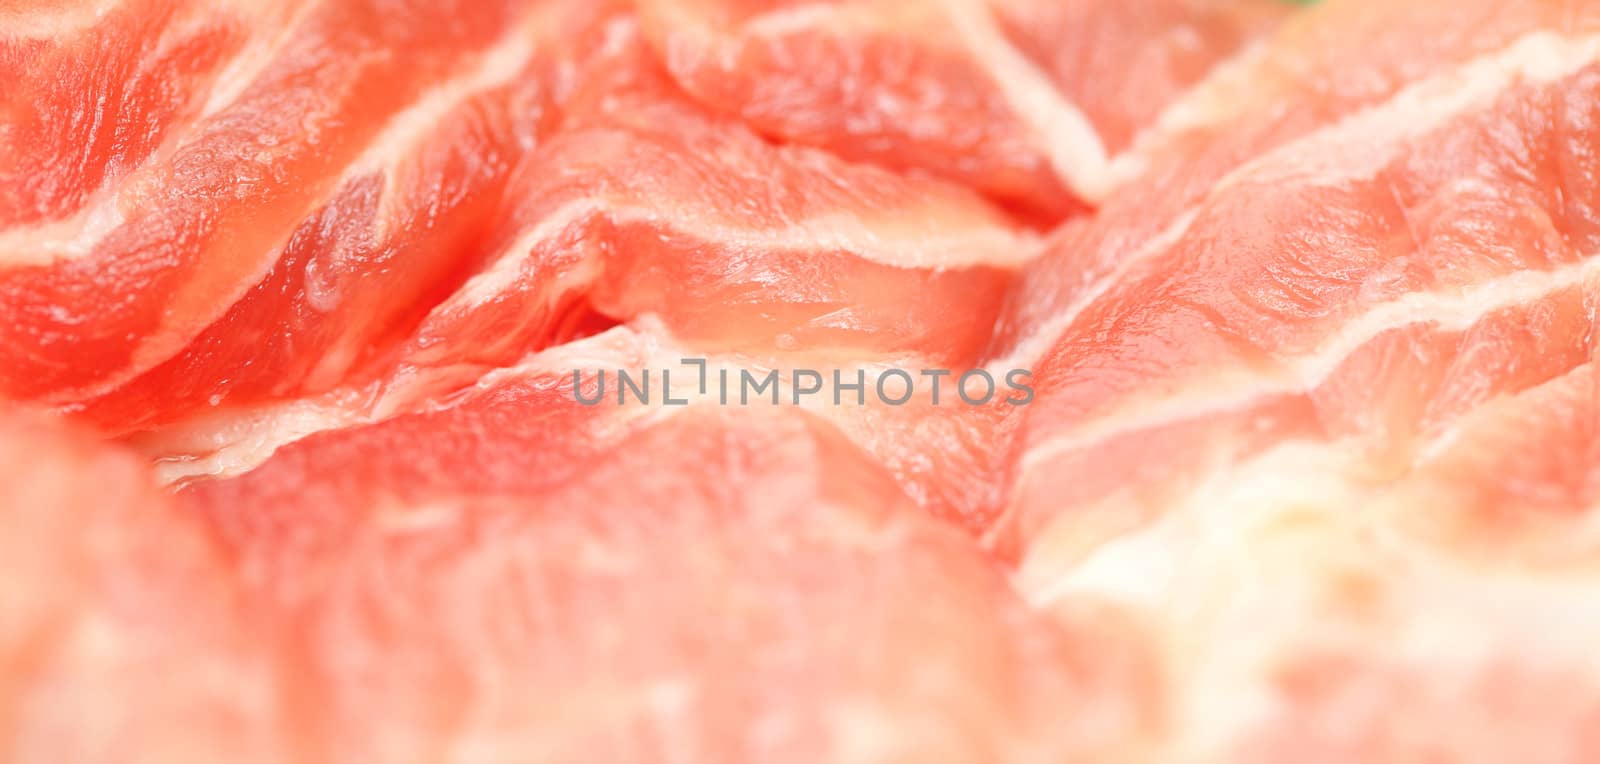 Pictured meat. Pork close-up